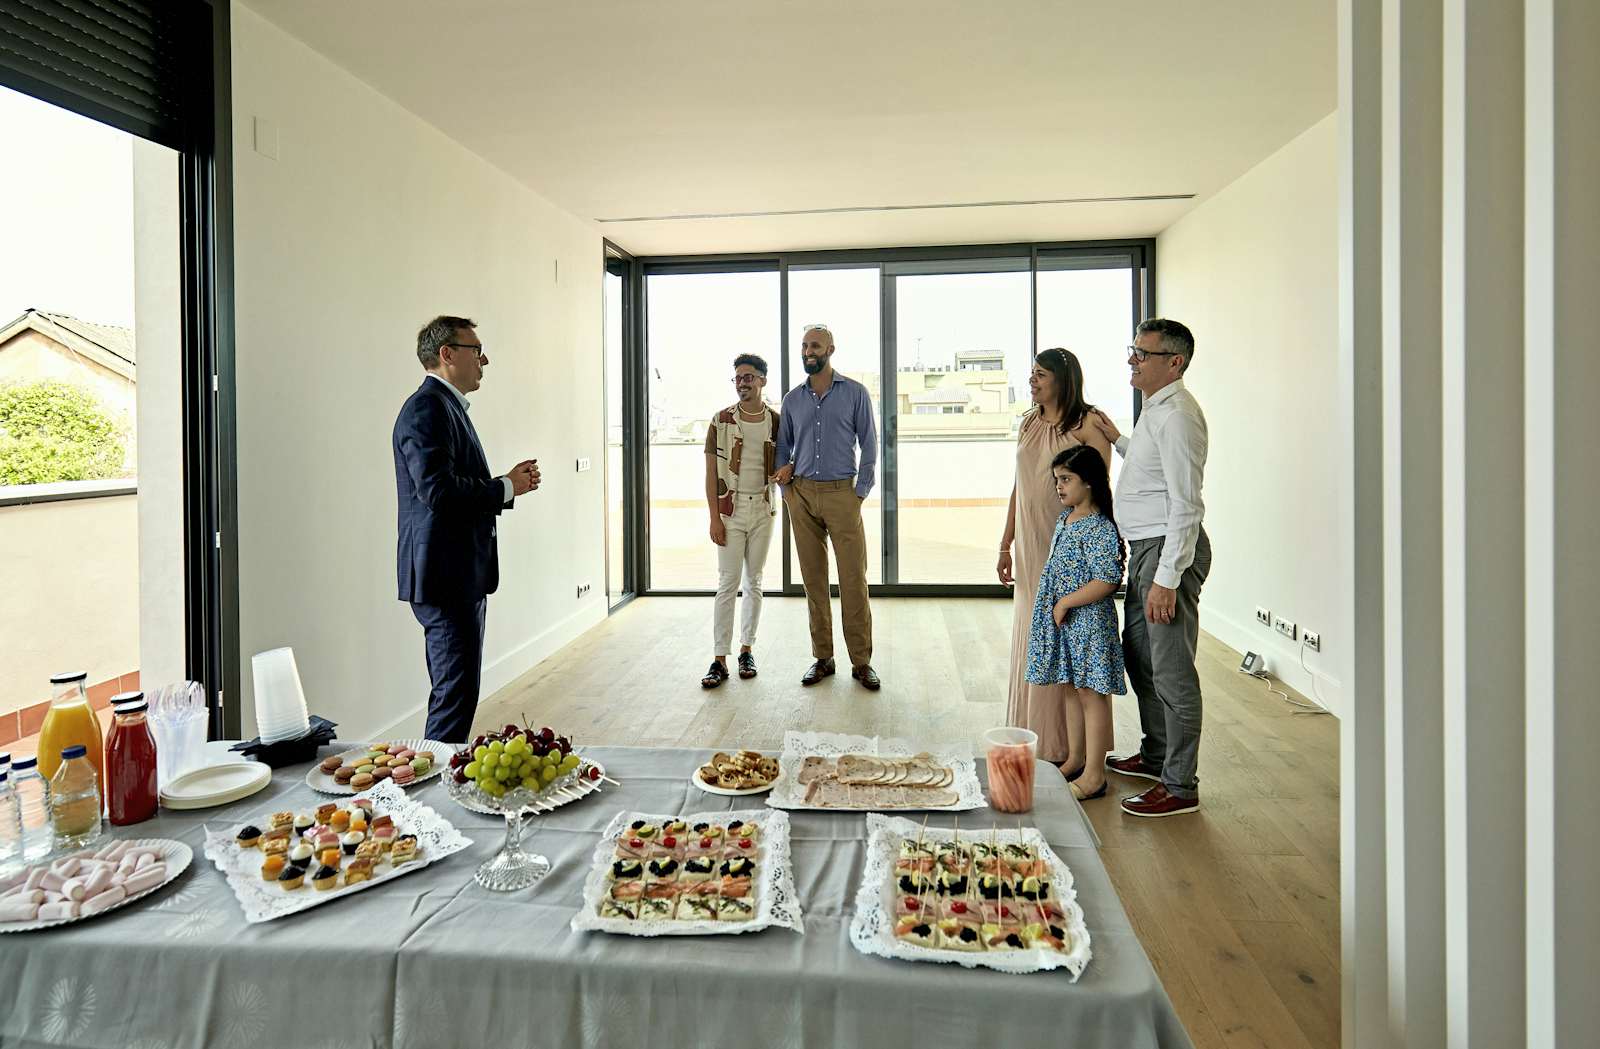 Real Estate Agent and Prospective Buyers at Open House